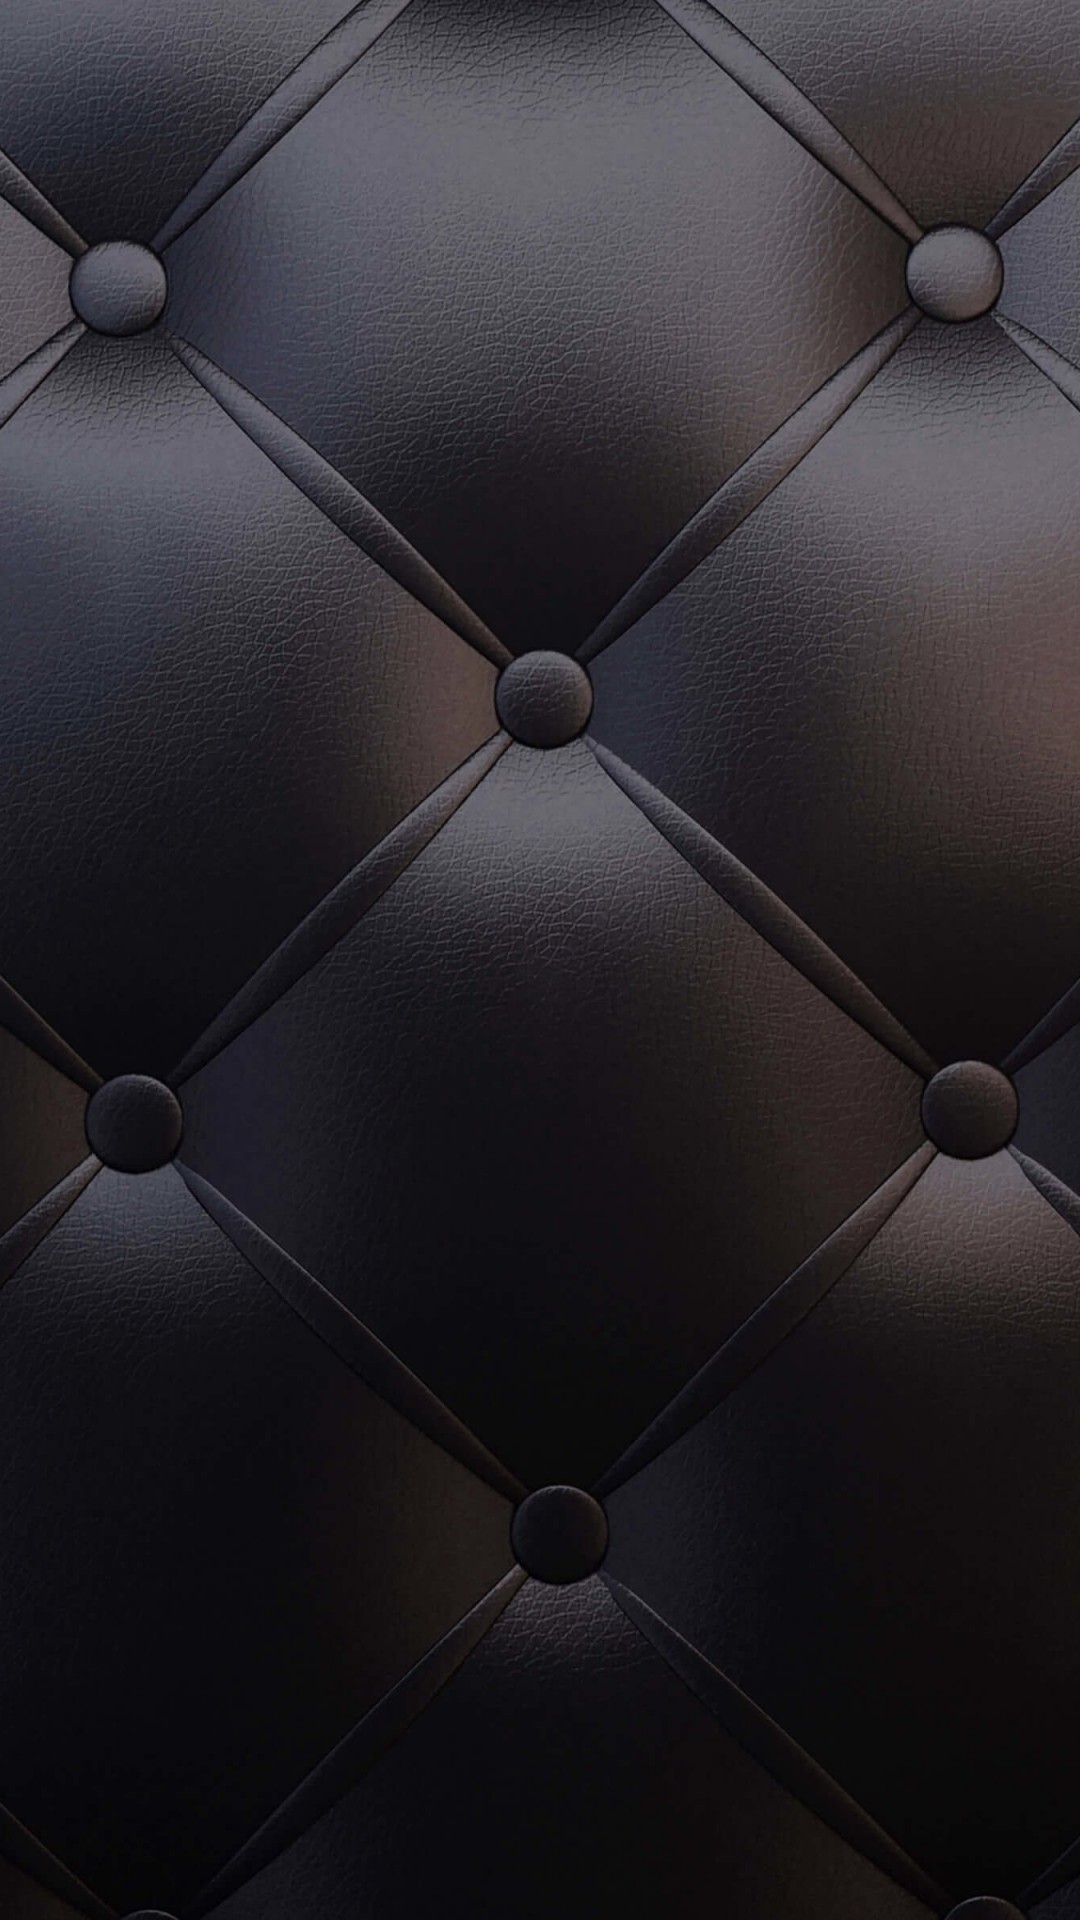 Black Leather Vintage Sofa Wallpaper for SONY Xperia Z1